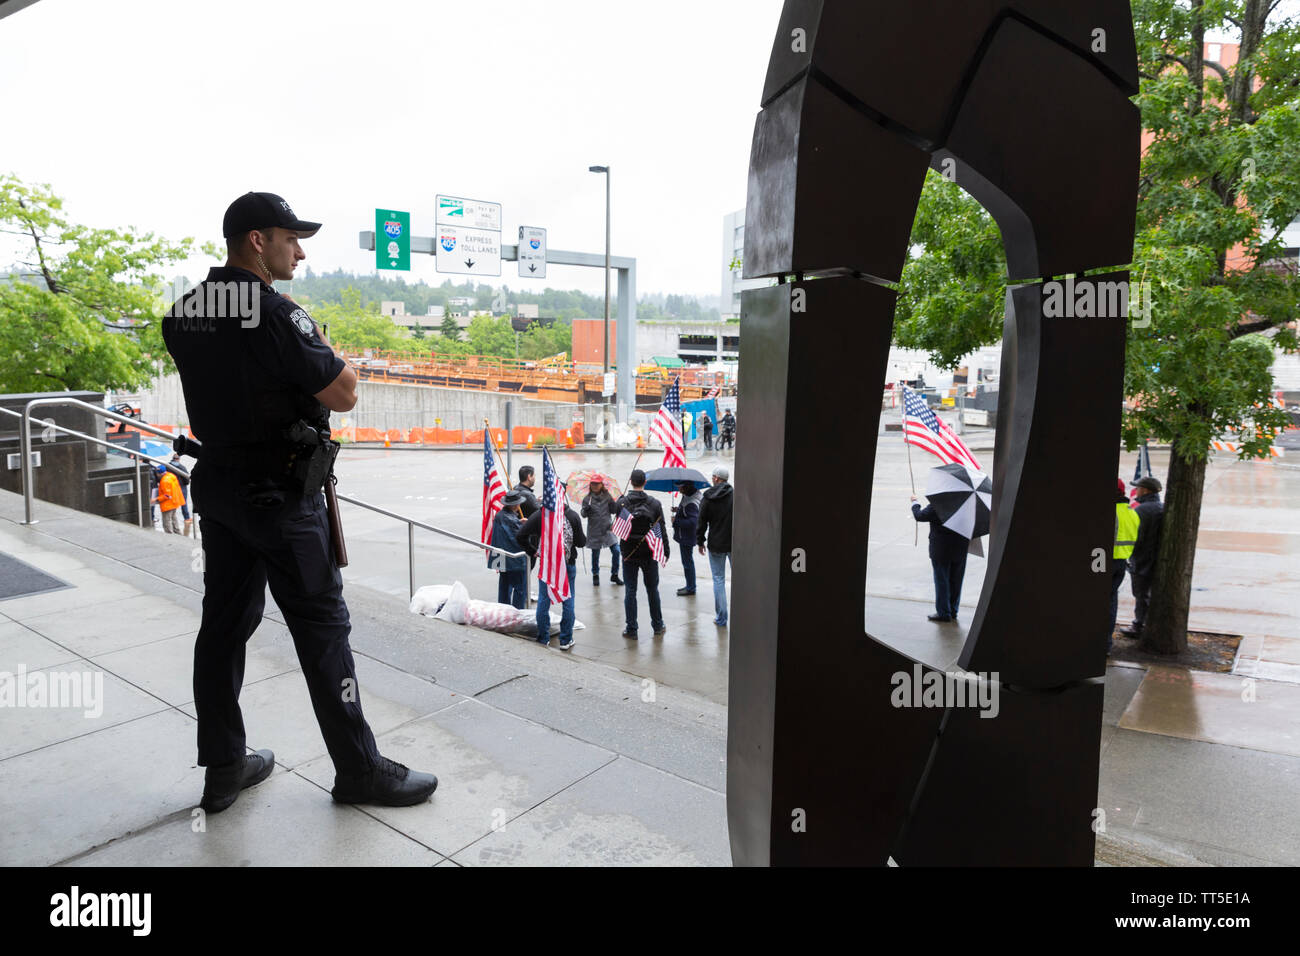 A member of the Bellevue Police watches as protesters gather against Rep. Ilhan Omar in Bellevue, Washington on Saturday, May 25, 2019. Patriots of Washington lead the protest against the representative who was headlining a CAIR-WA Ramadan fundraiser. Stock Photo